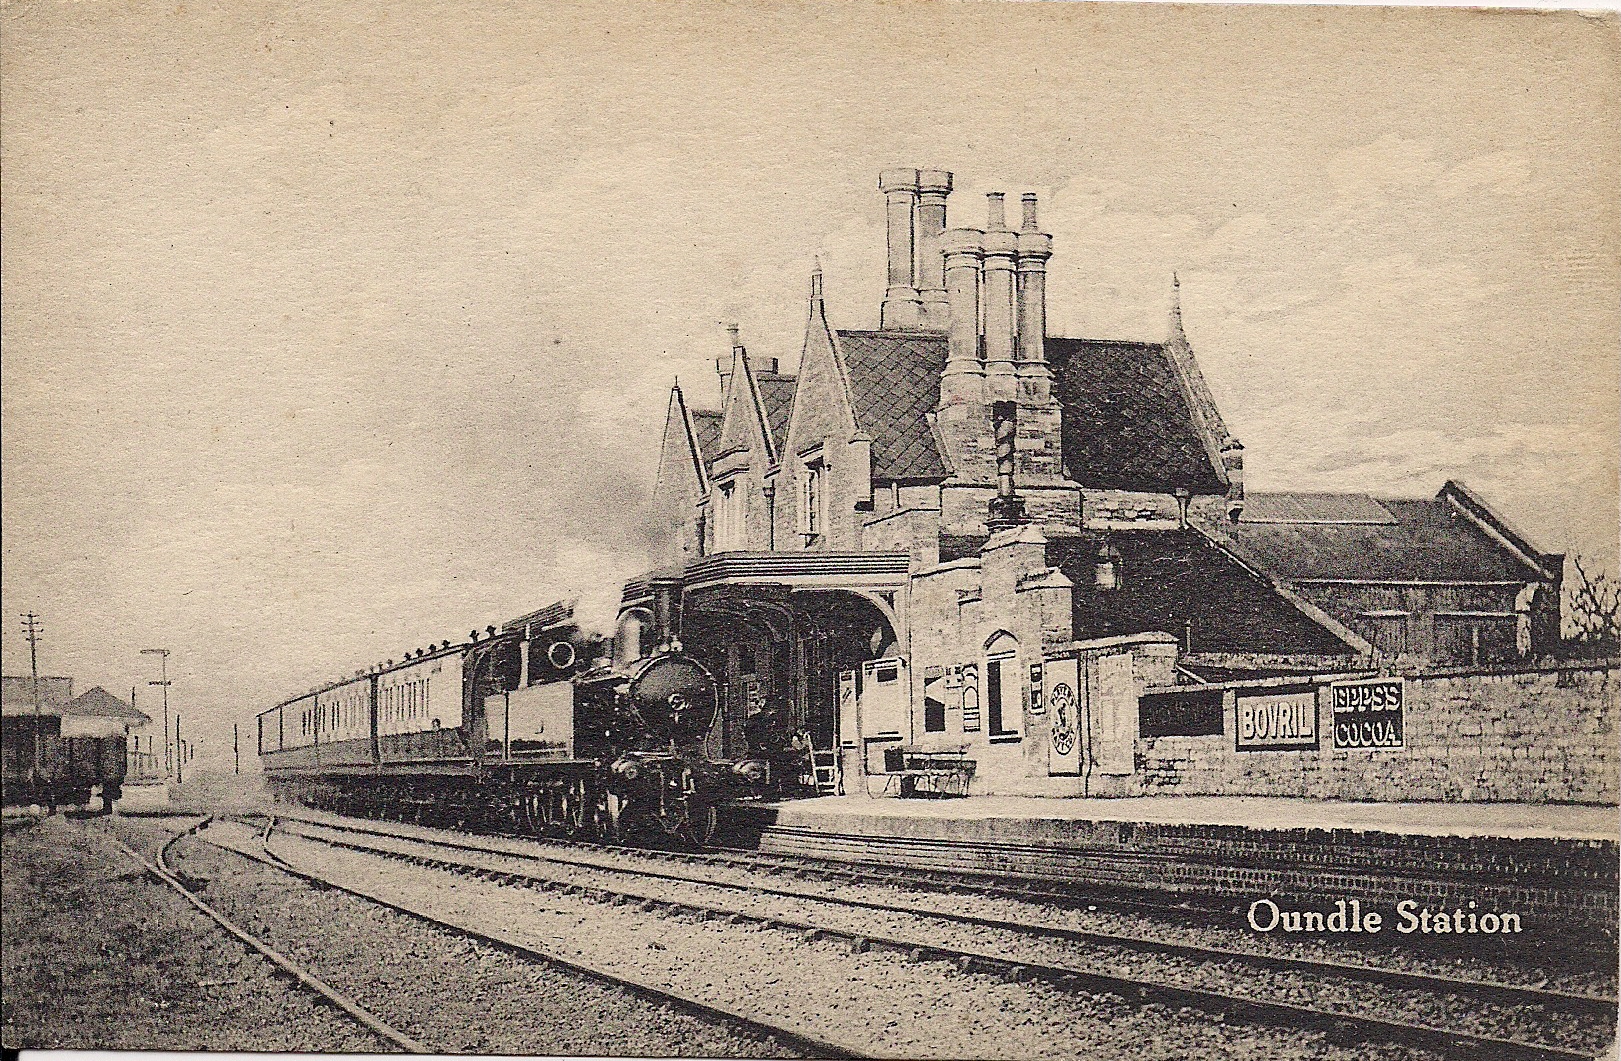 Oundle railway station